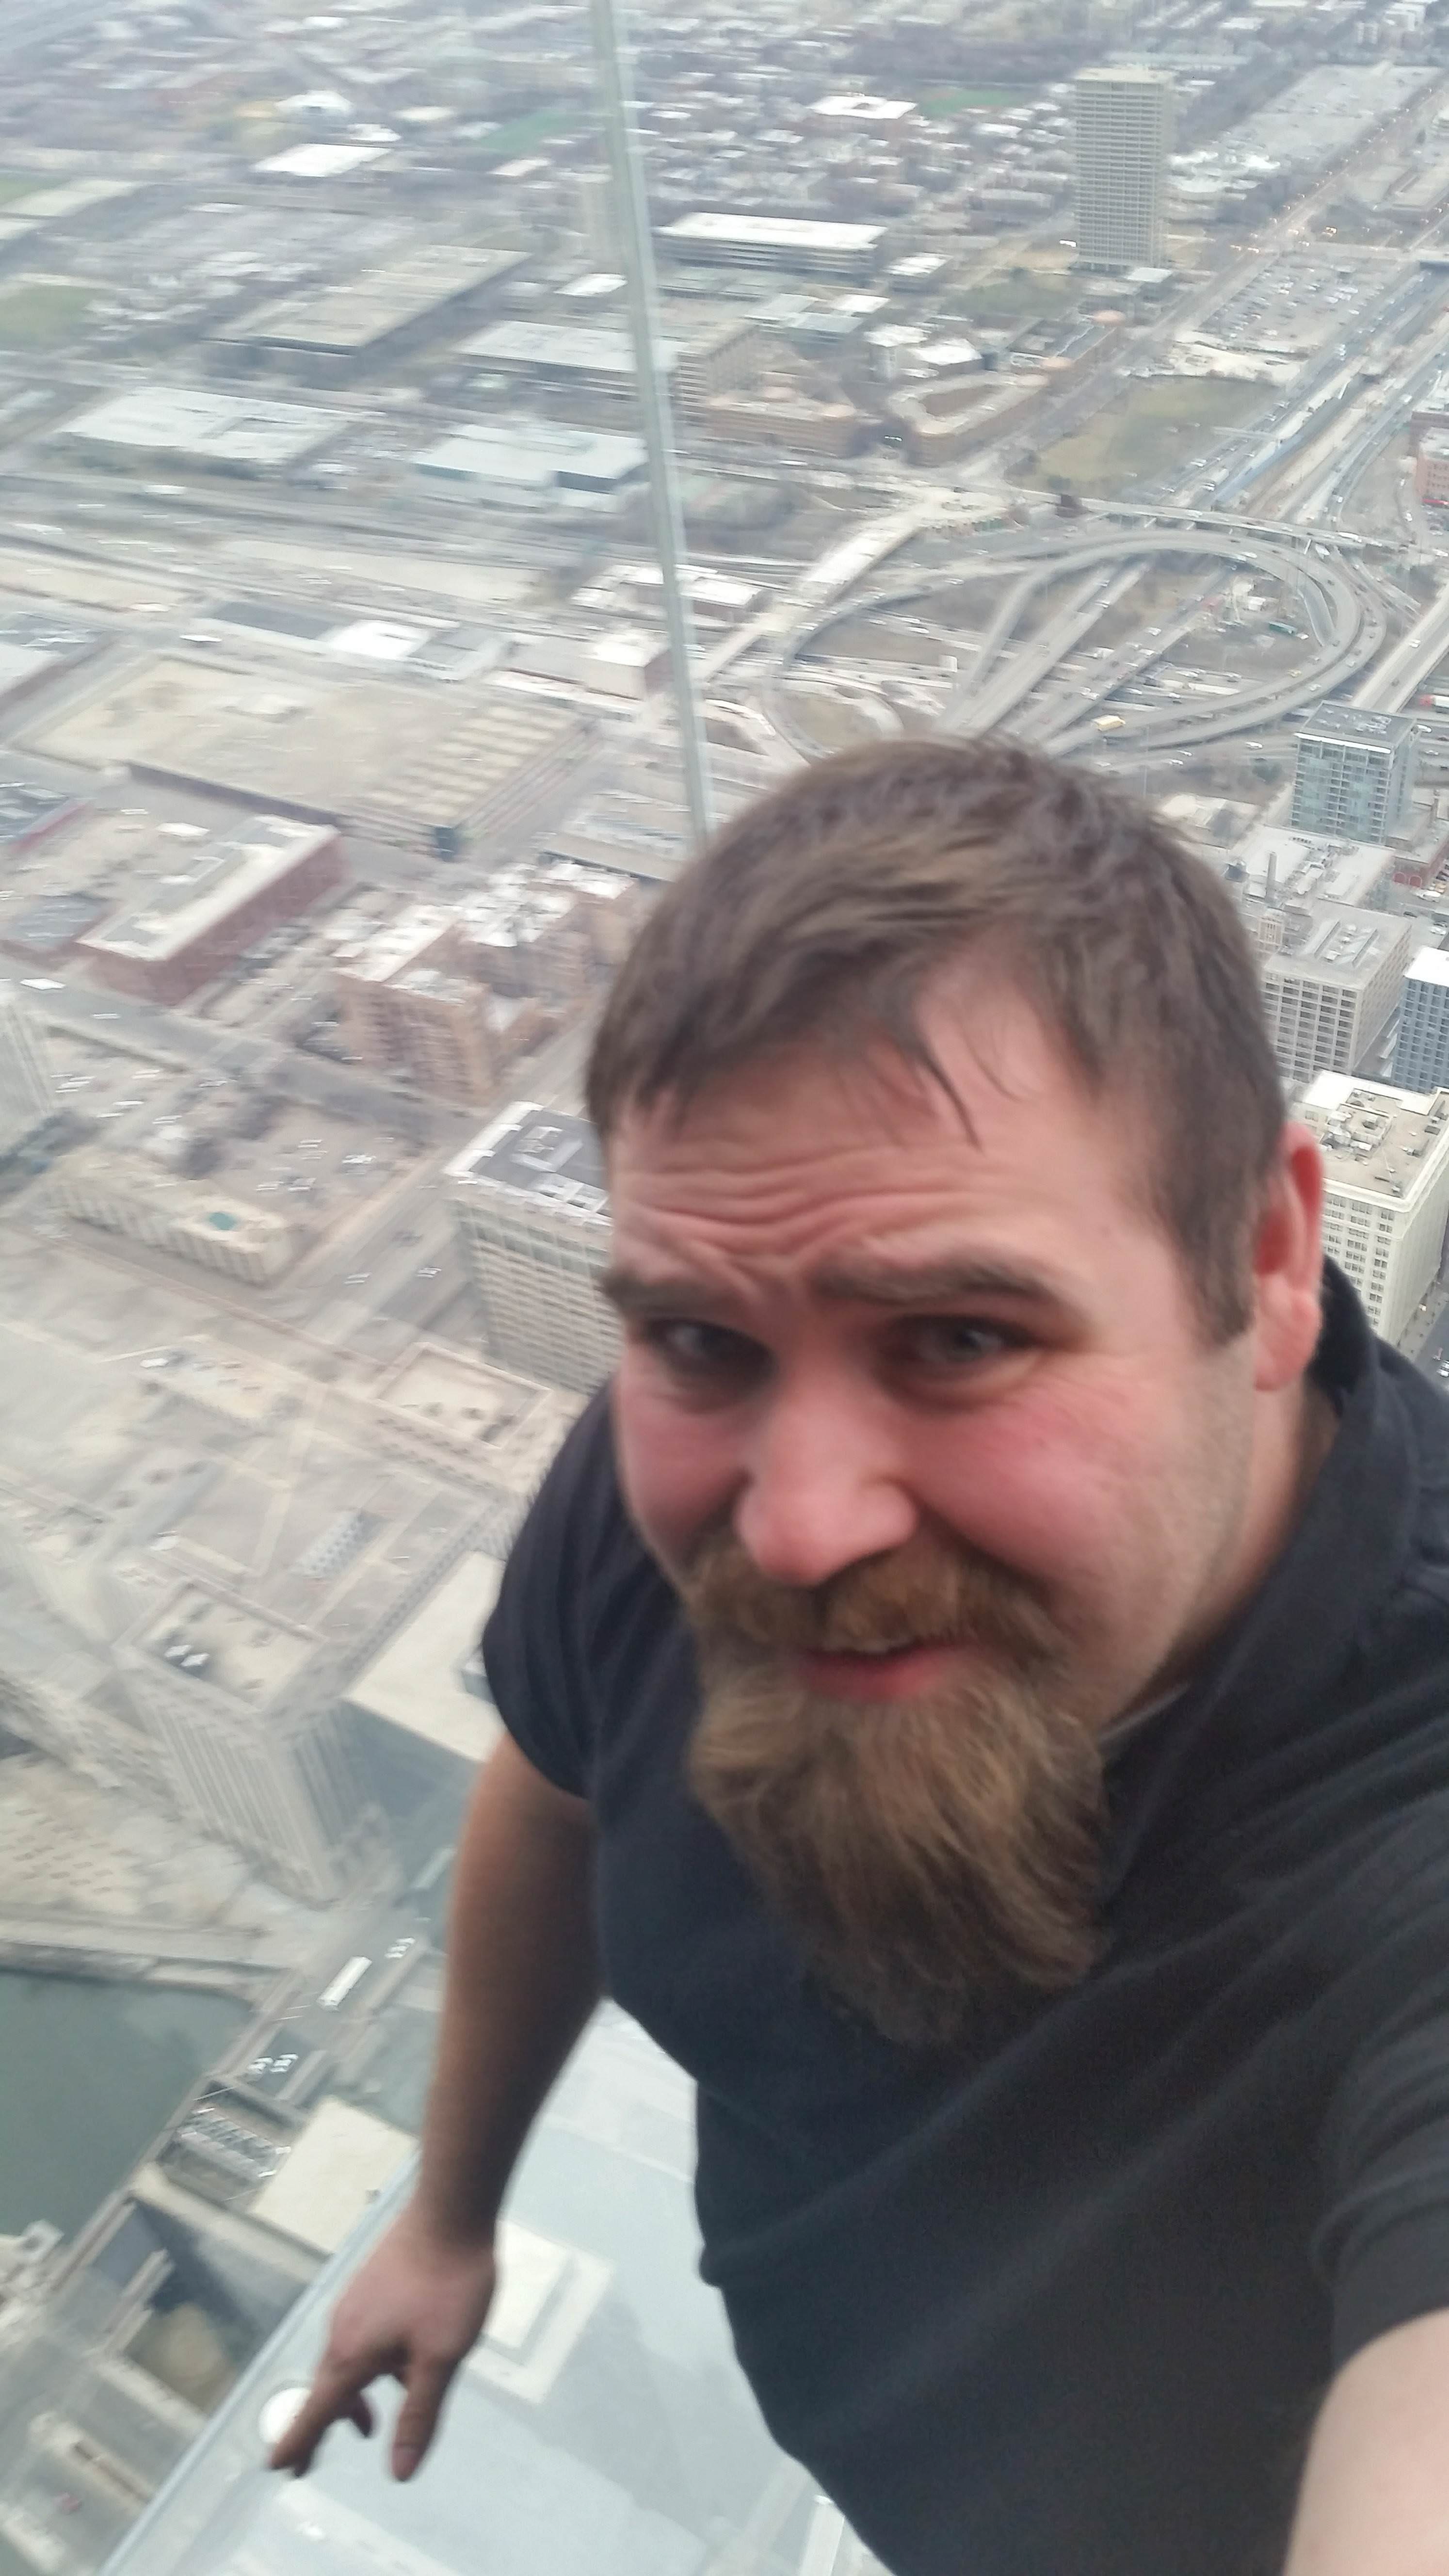 I'm deathly afraid of heights.. I went to the Skydeck at the Willis Tower (Sears Tower) and slowly inched my back to the edge, mustered up all composure I could and took a pic. I thought I nailed it until I saw the photo..